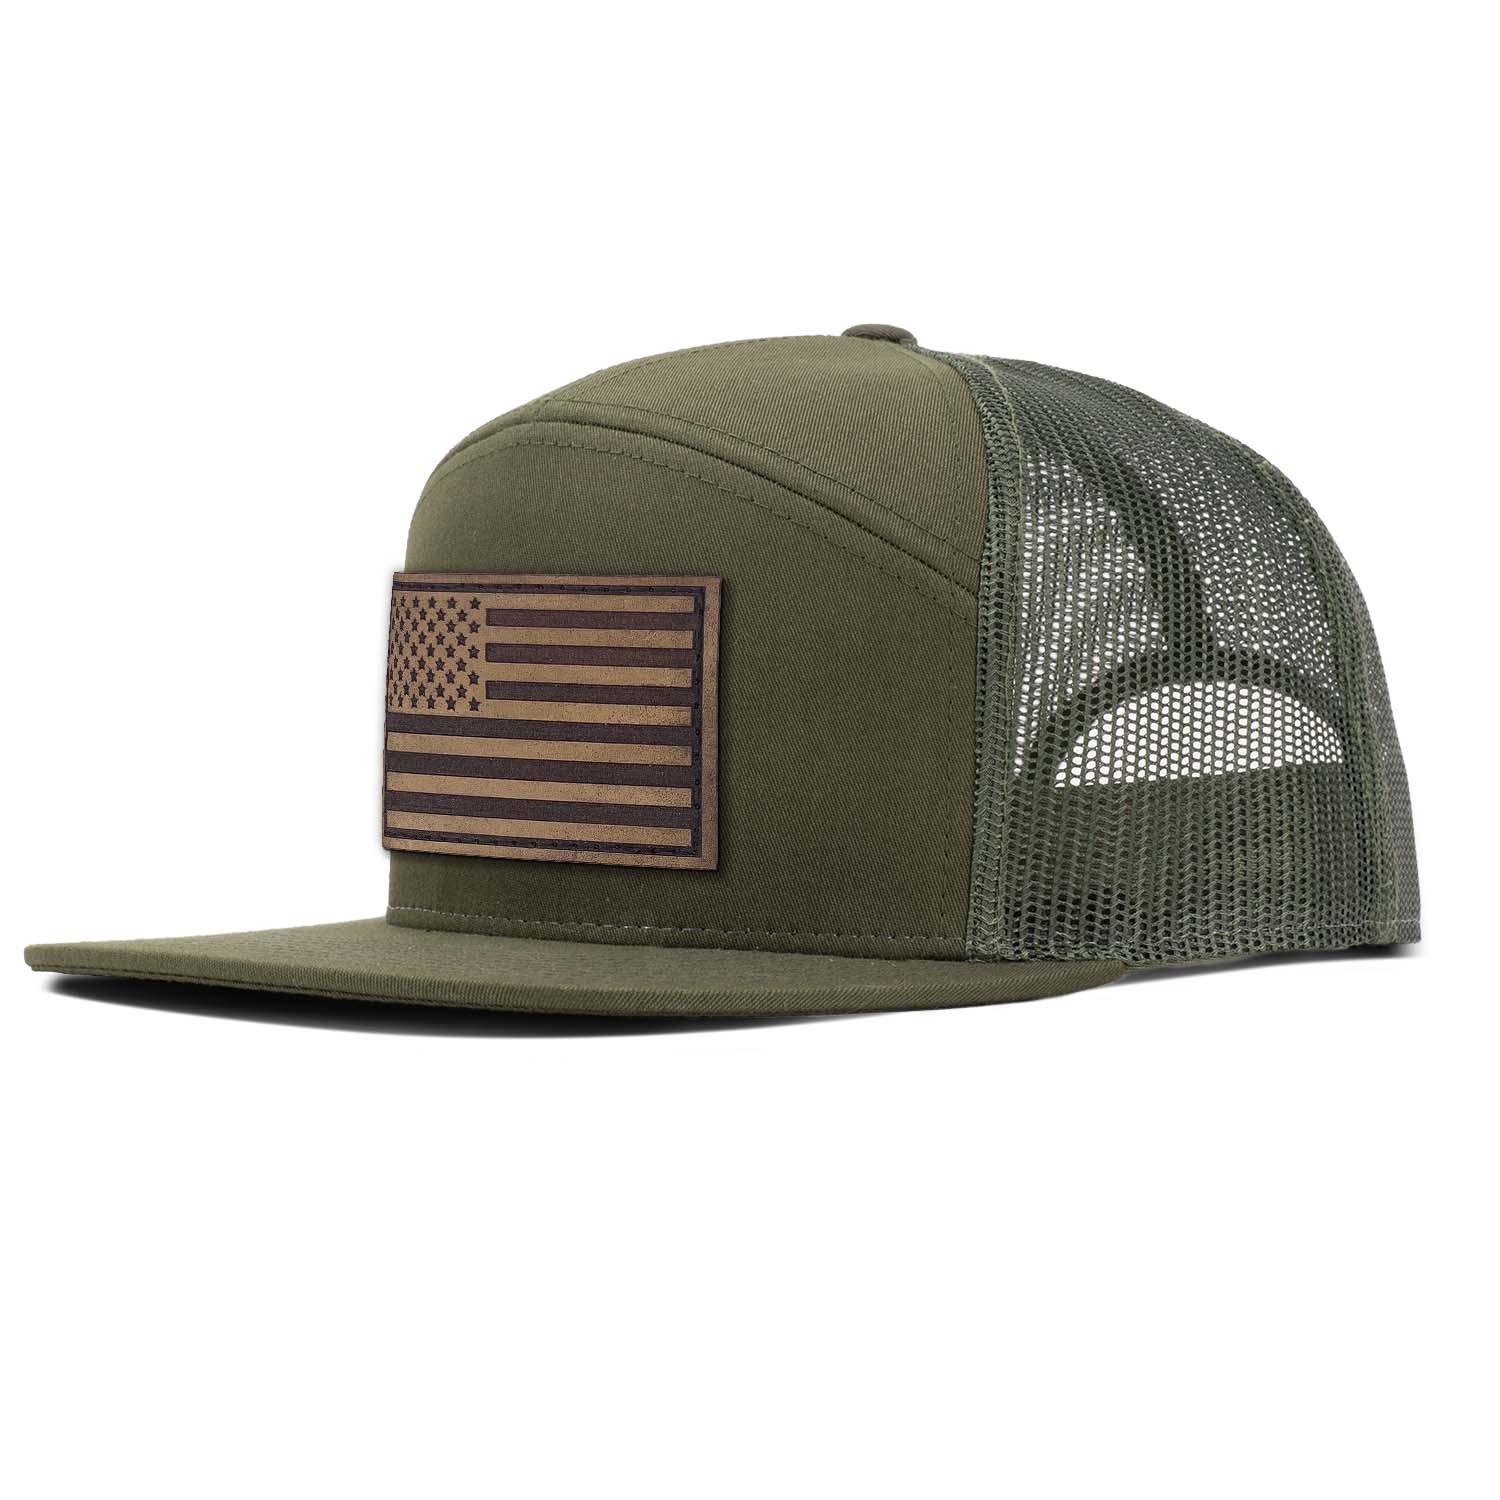 Revolution Mfg dark loden with loden mesh 7 panel trucker featuring our full grain leather antique finish American Flag patch on the seamless front panel.